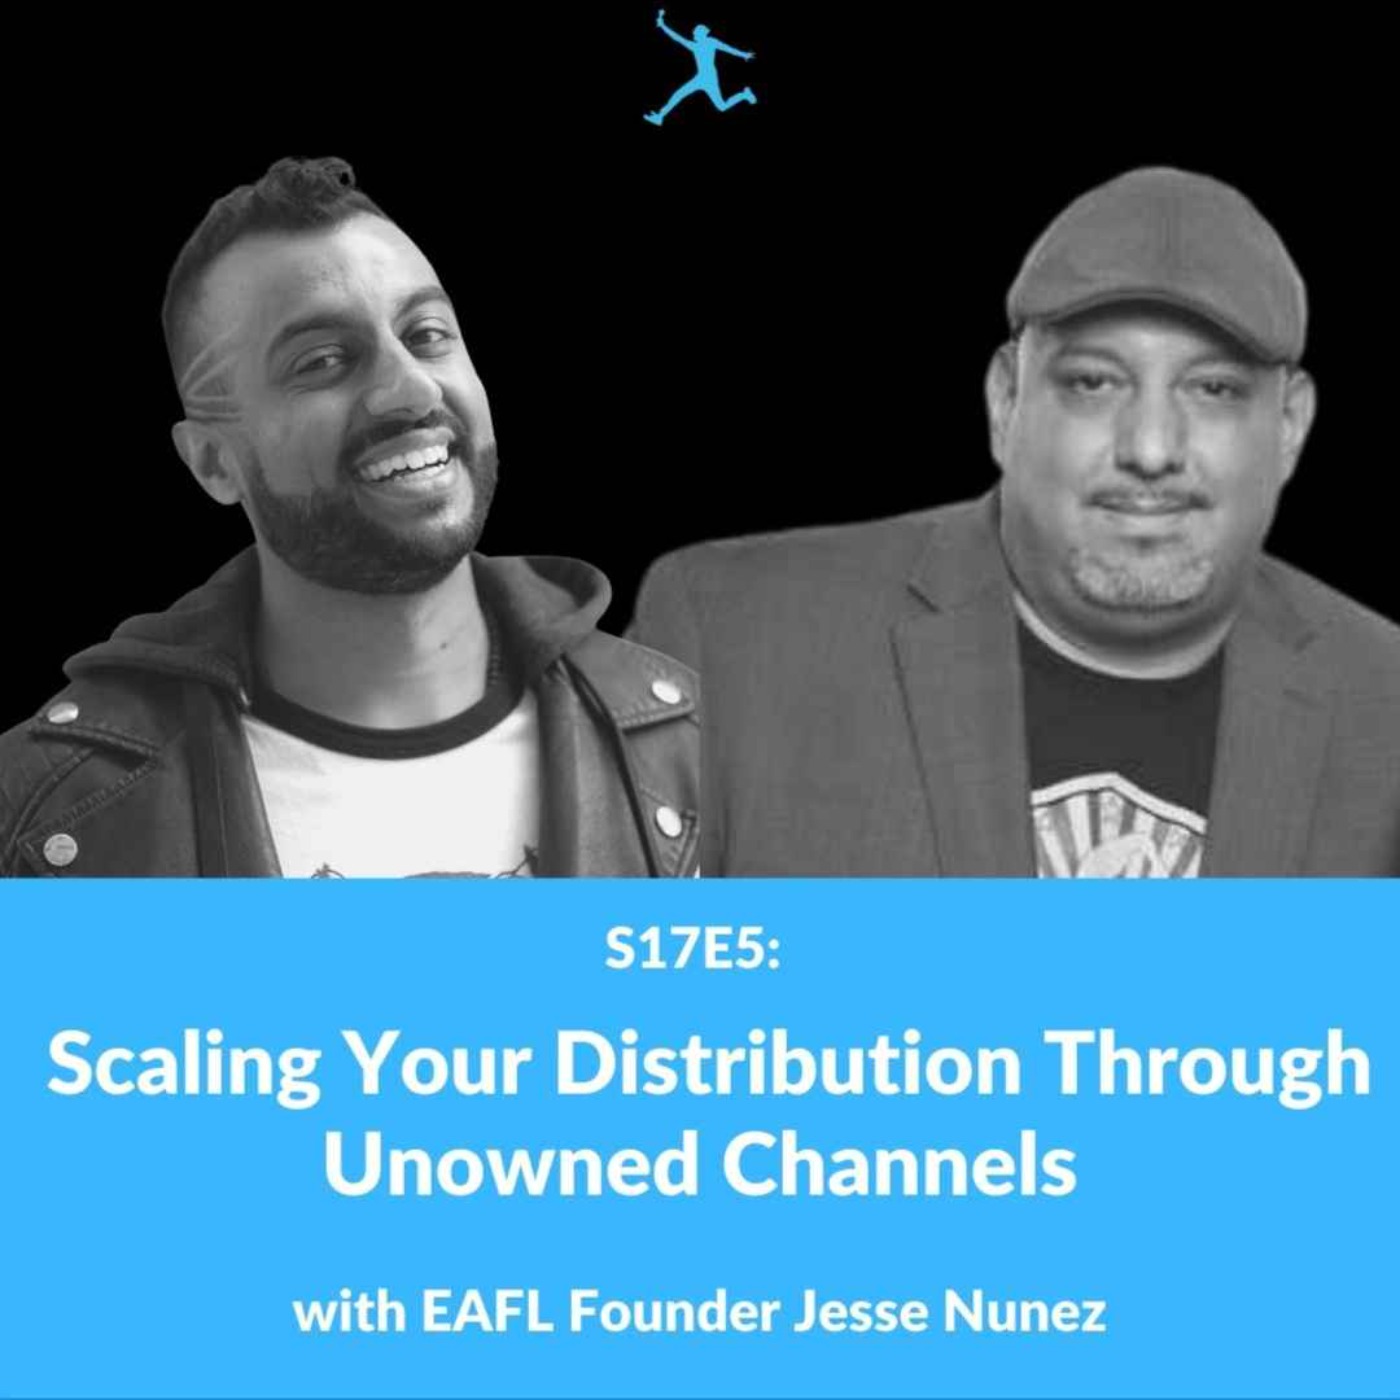 S17E5: Scaling Your Distribution Through Unowned Channels with EAFL Founder Jesse Nunez